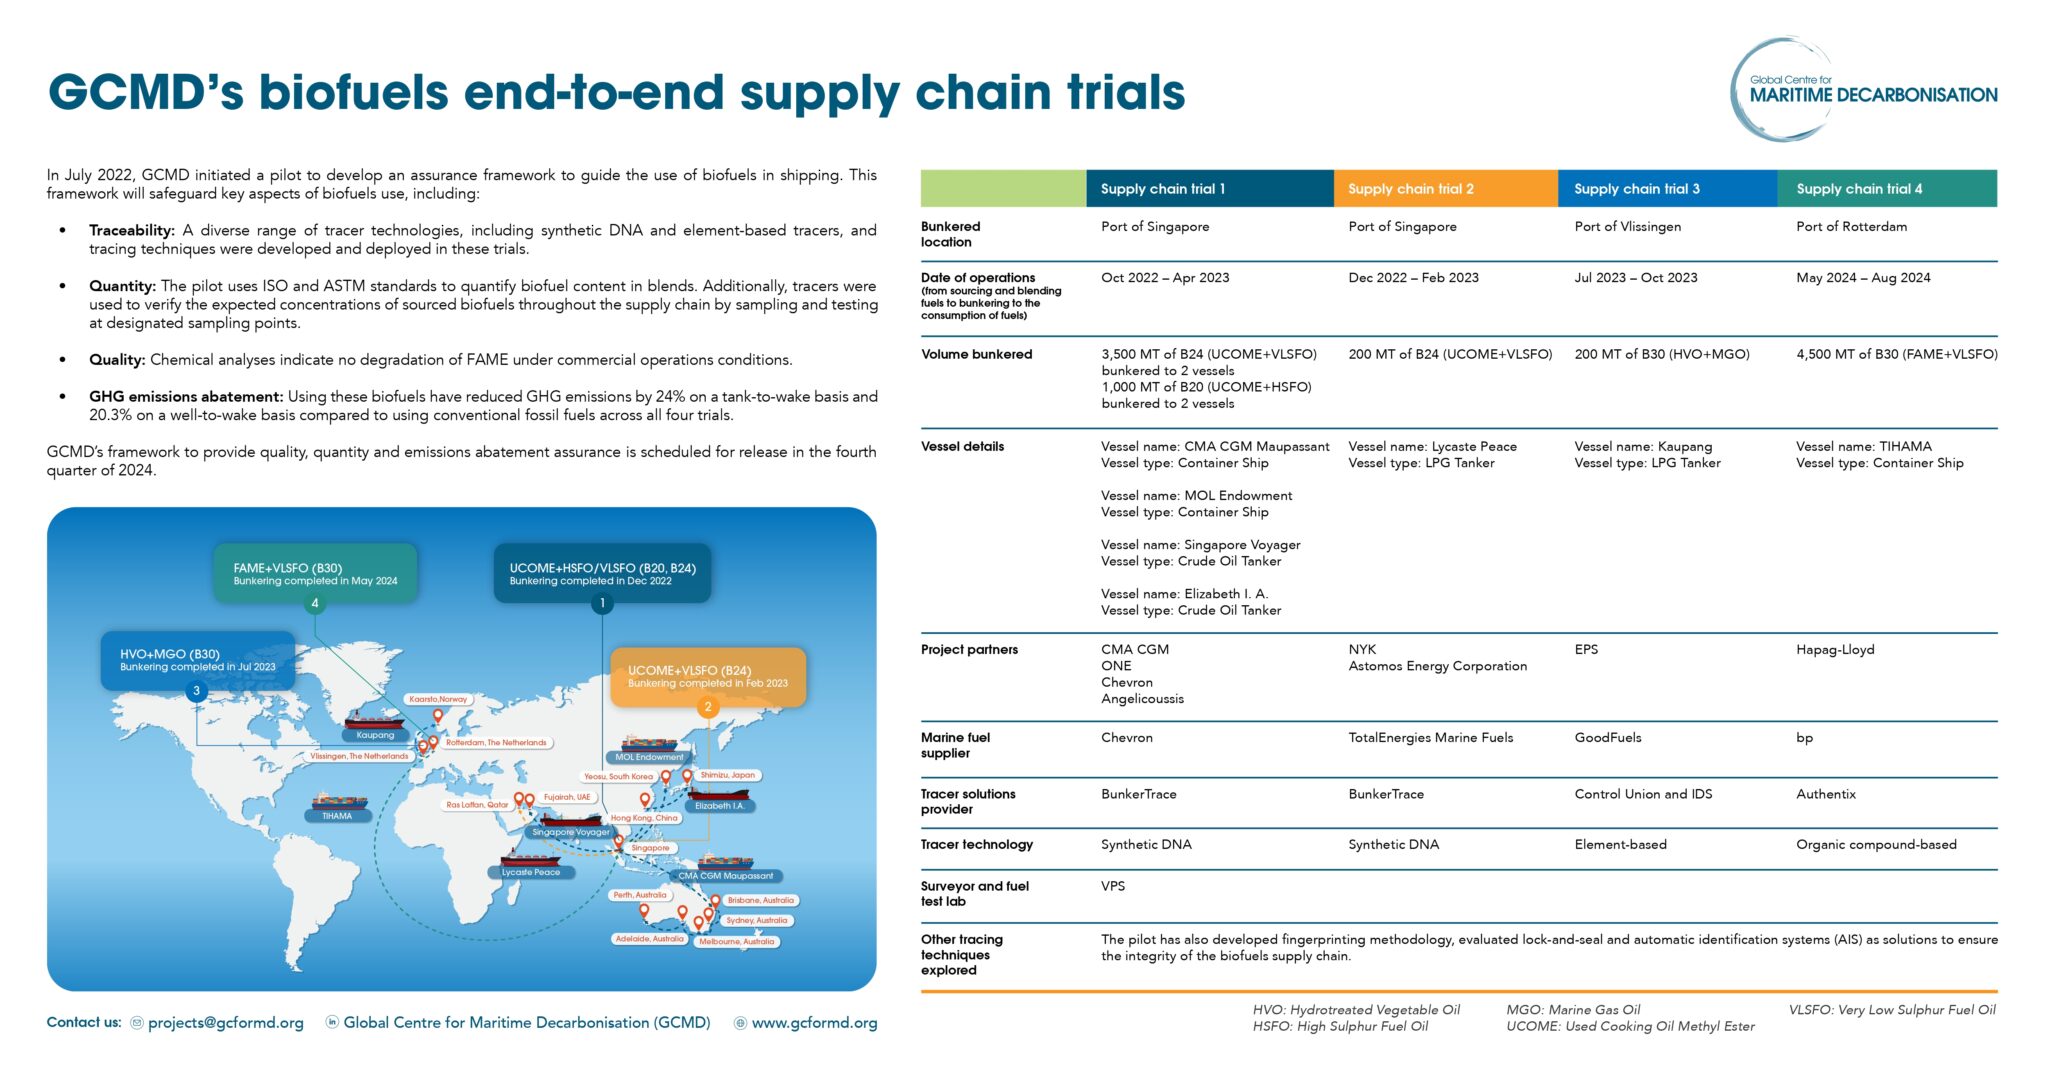 GCMD concludes biofuels supply chain trials